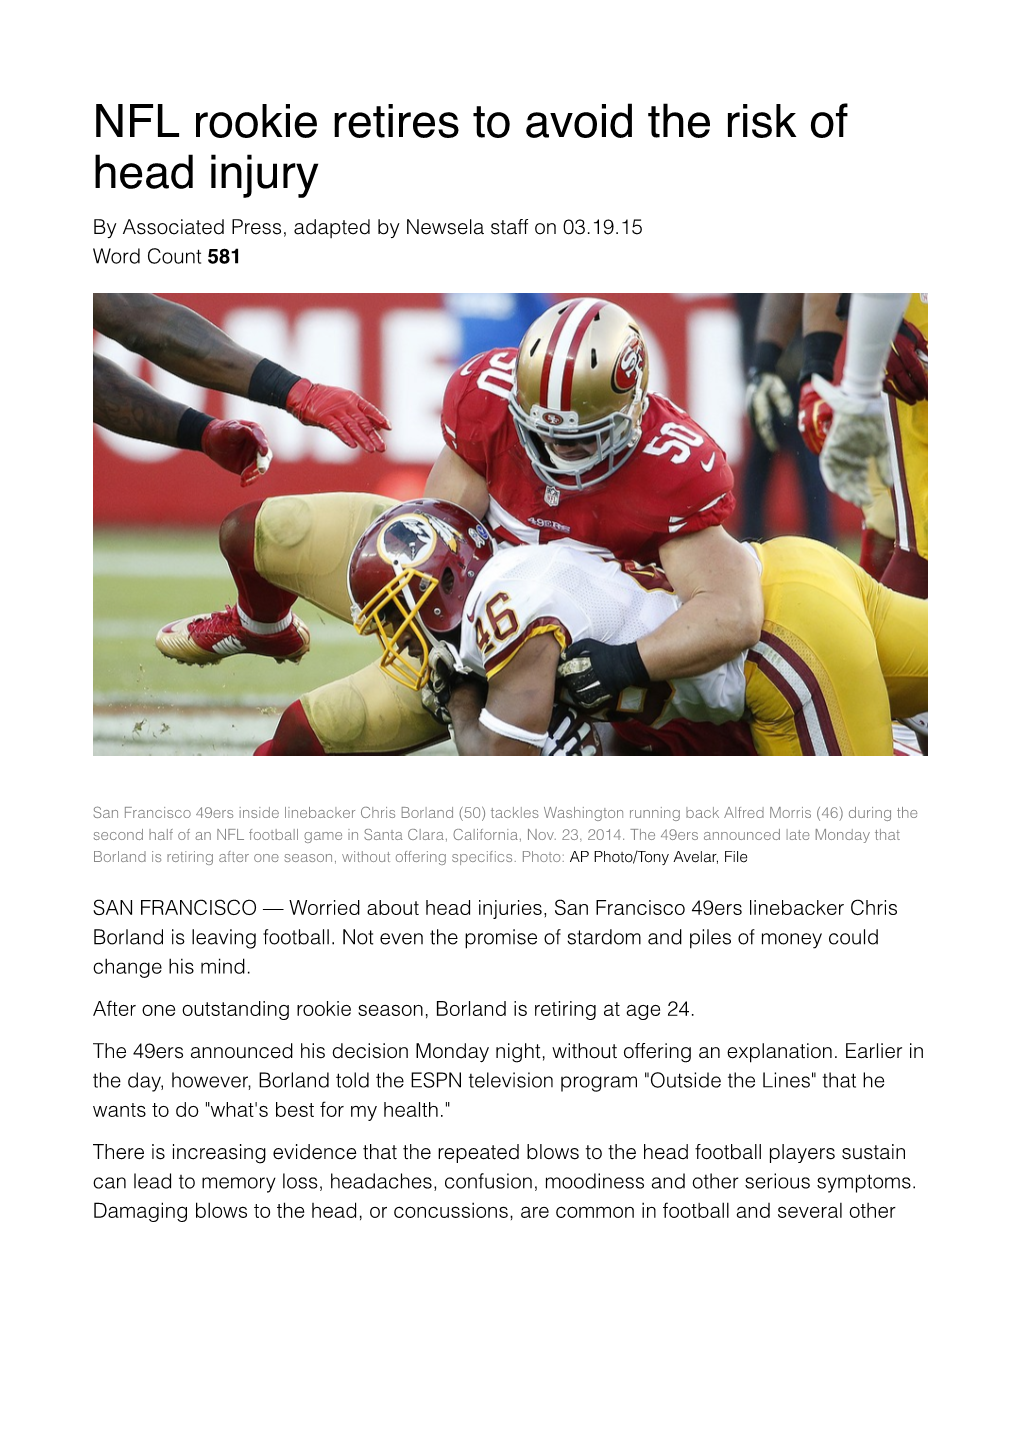 NFL Rookie Retires to Avoid the Risk of Head Injury by Associated Press, Adapted by Newsela Staff on 03.19.15 Word Count 581